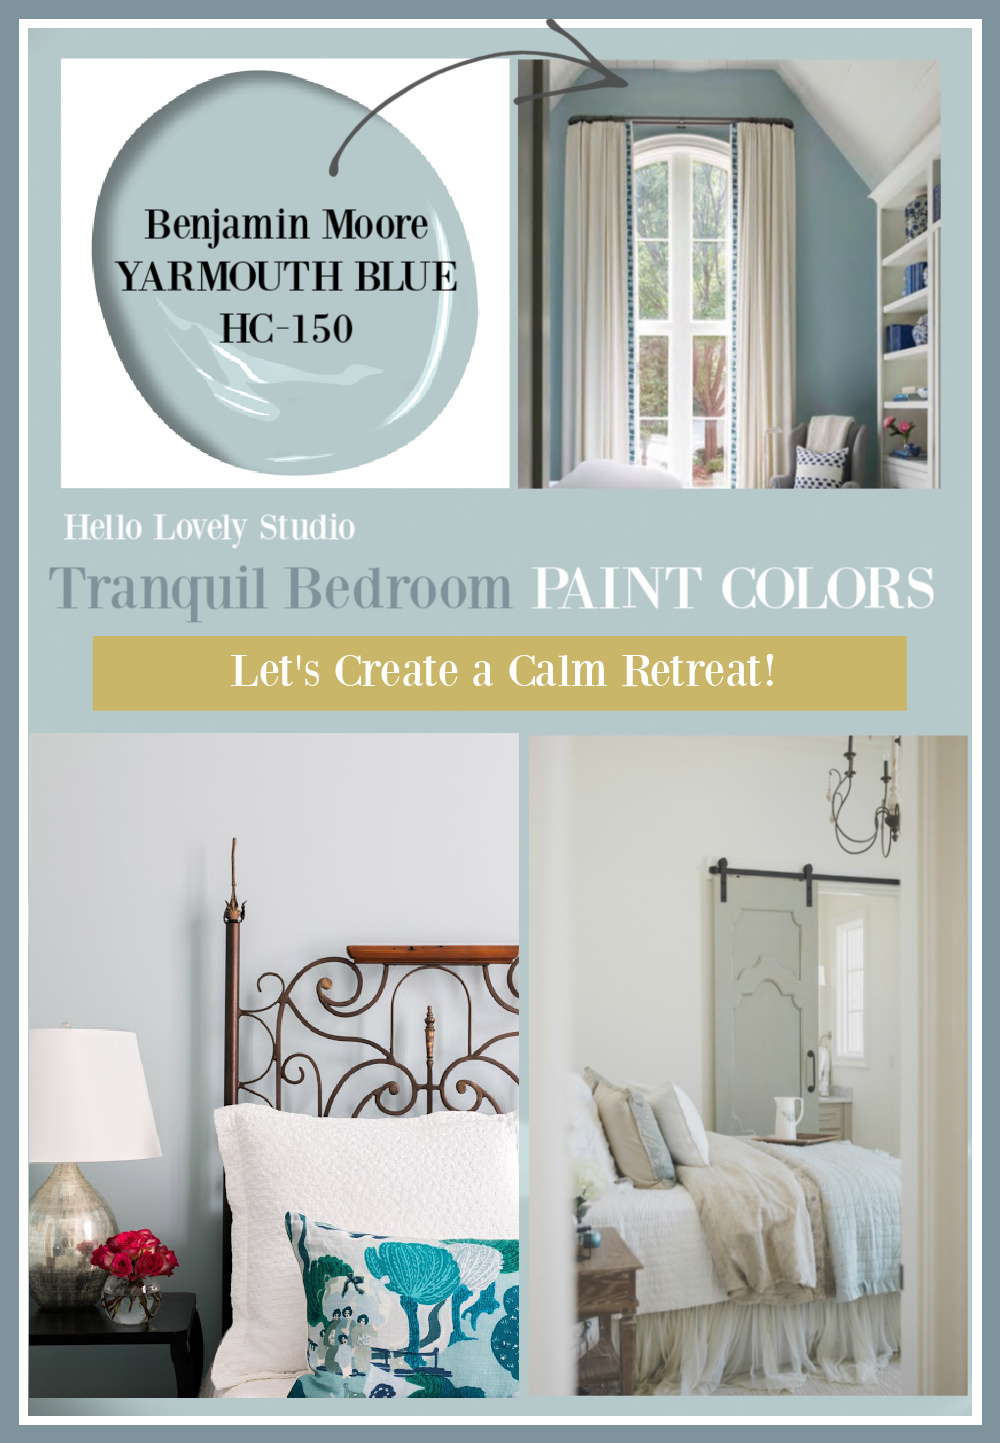 Tranquil bedroom paint colors - 16 soothing ideas to try on Hello Lovely. #paintcolors #tranquilpaintcolors #bedroompaintcolors